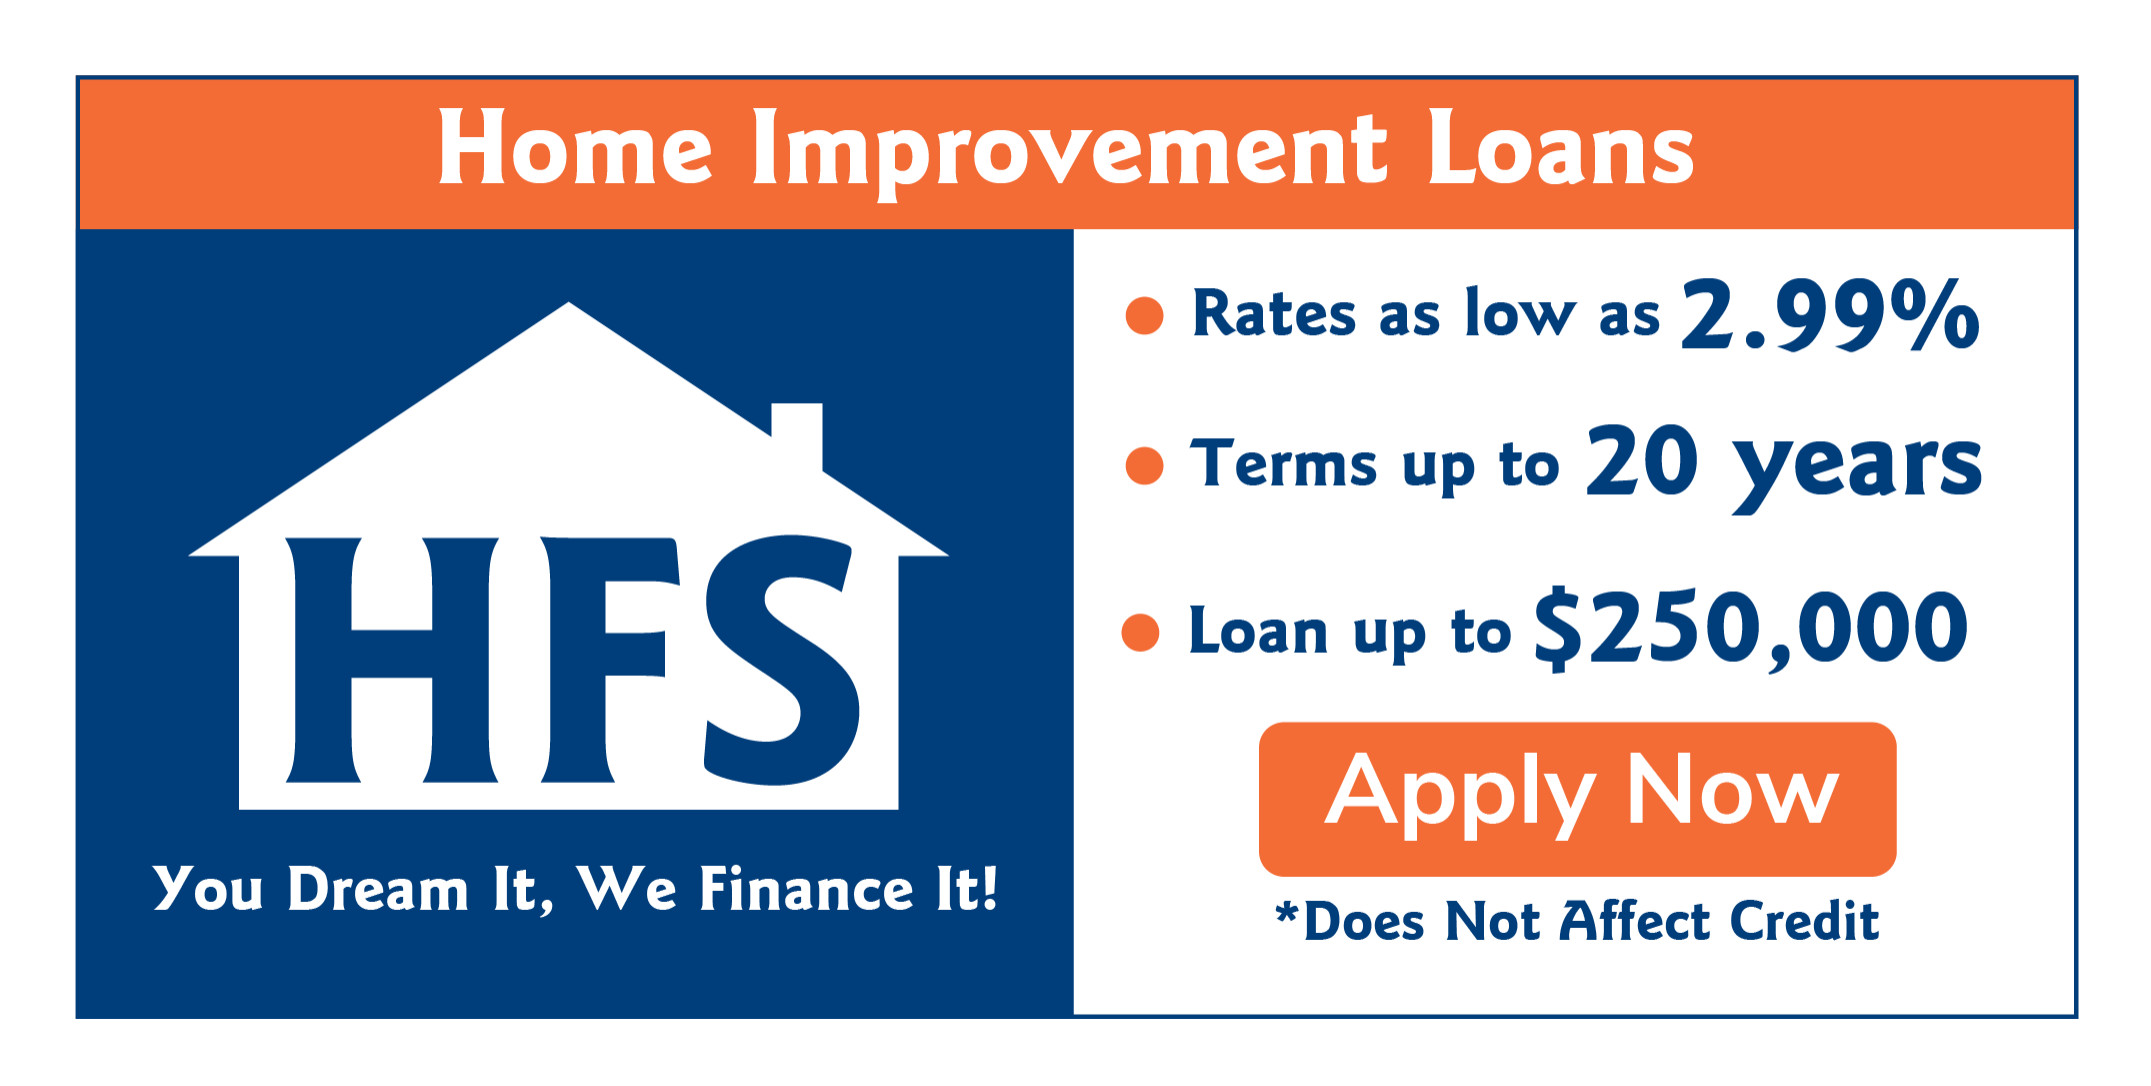 Home Improvement Loans with HFS